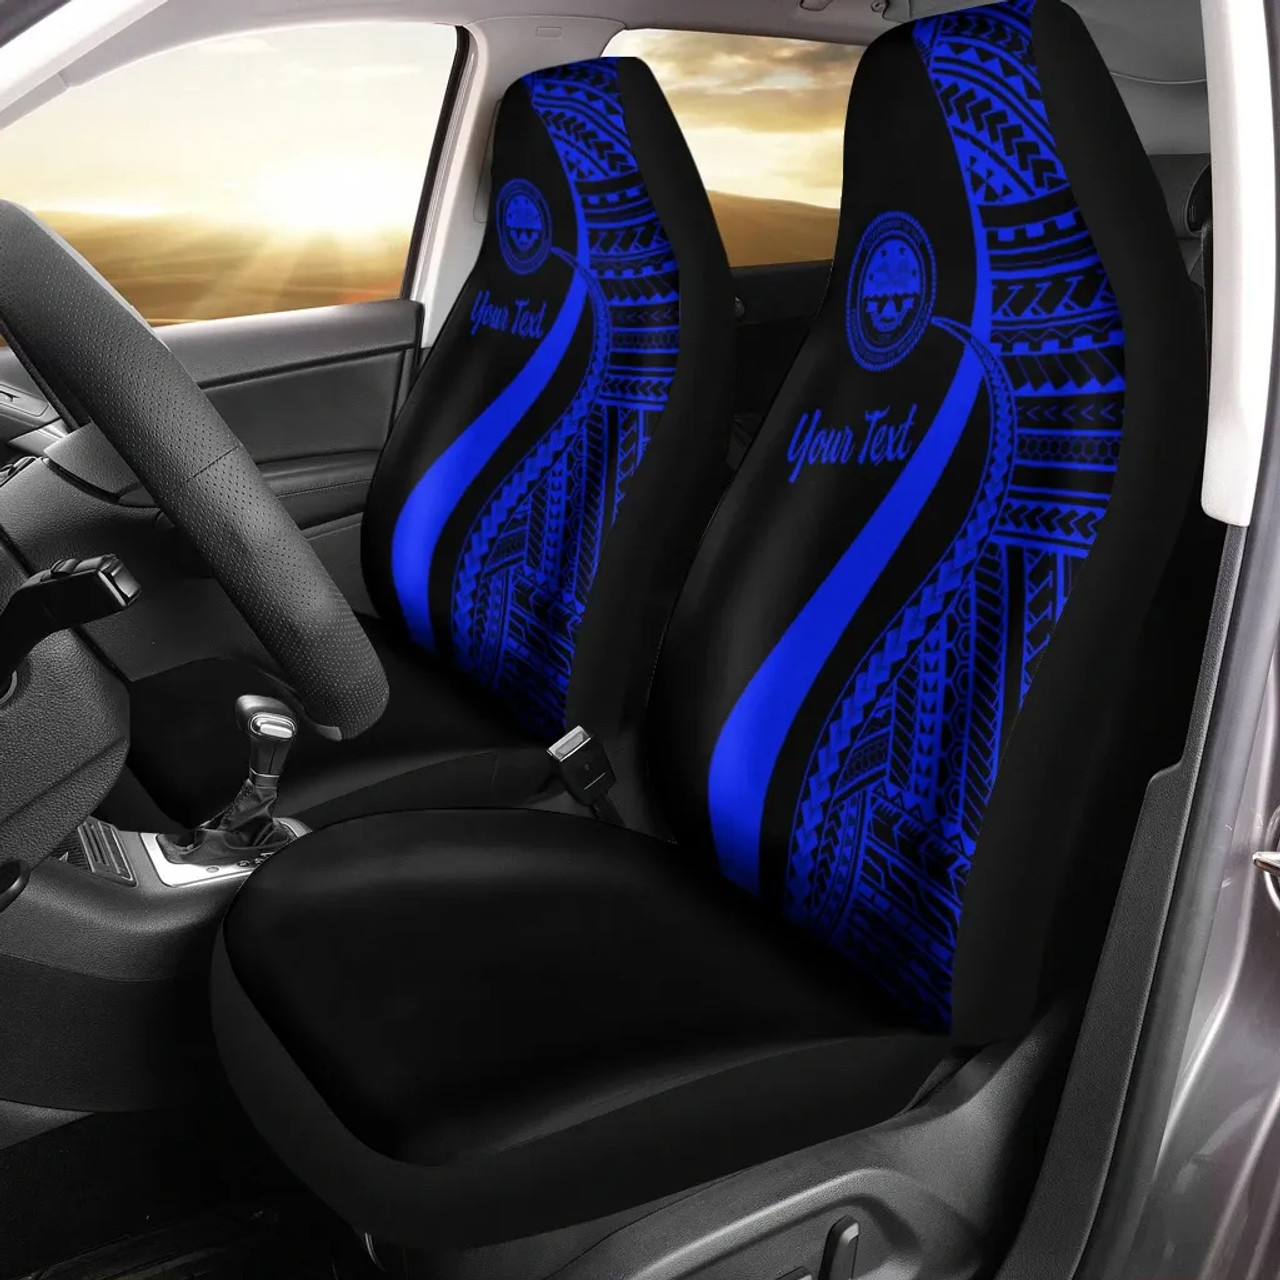 Federated States of Micronesia Custom Personalised Car Seat Covers - Blue Polynesian Tentacle Tribal Pattern